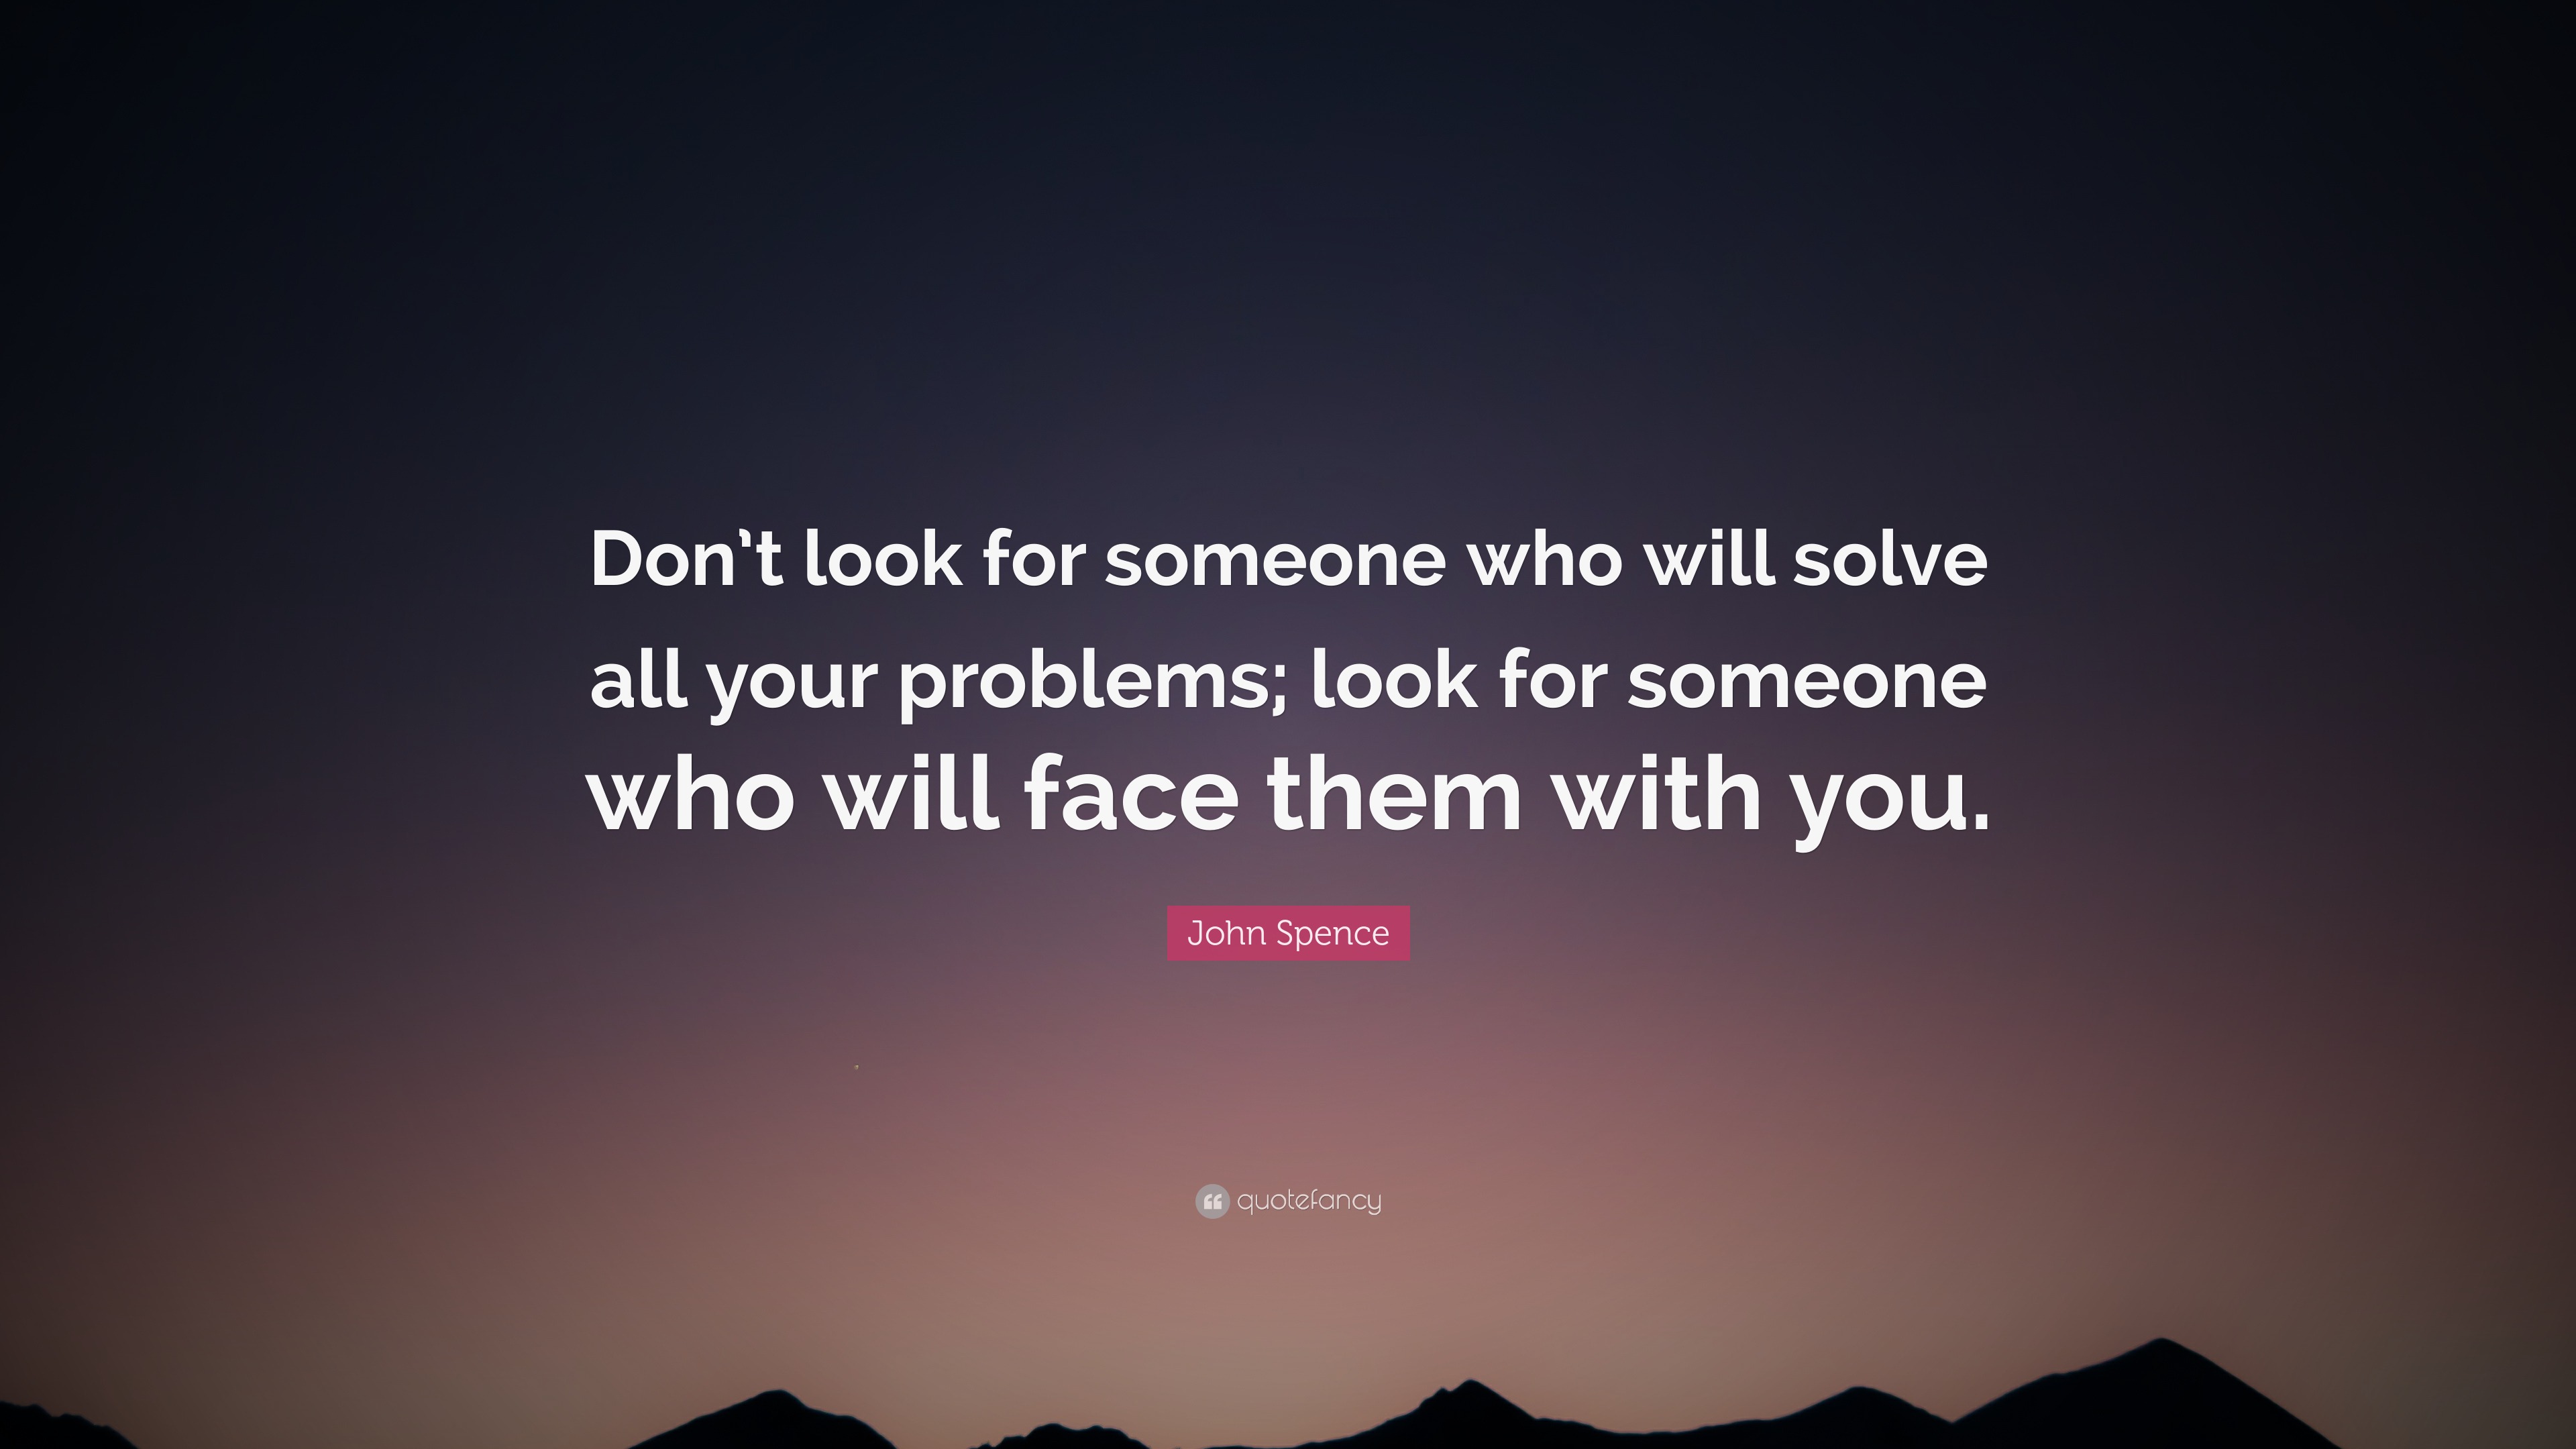 John Spence Quote Dont Look For Someone Who Will Solve All Your Problems Look For Someone